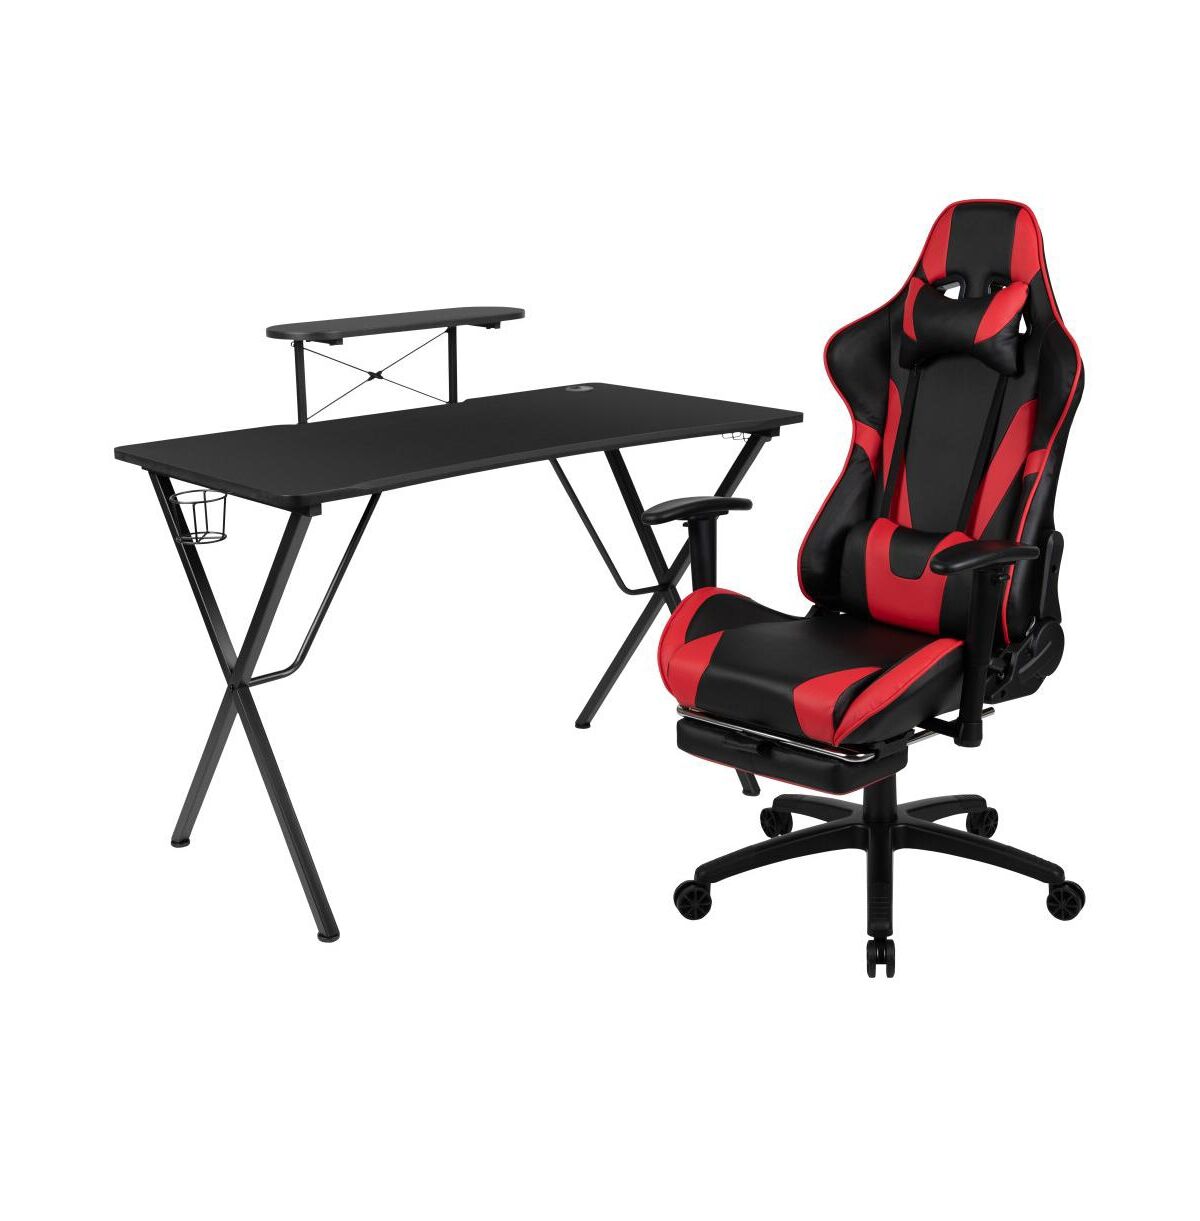 Emma+oliver Gaming Desk & Chair Set - Cup Holder, Headphone Hook, And Monitor Stand - Red